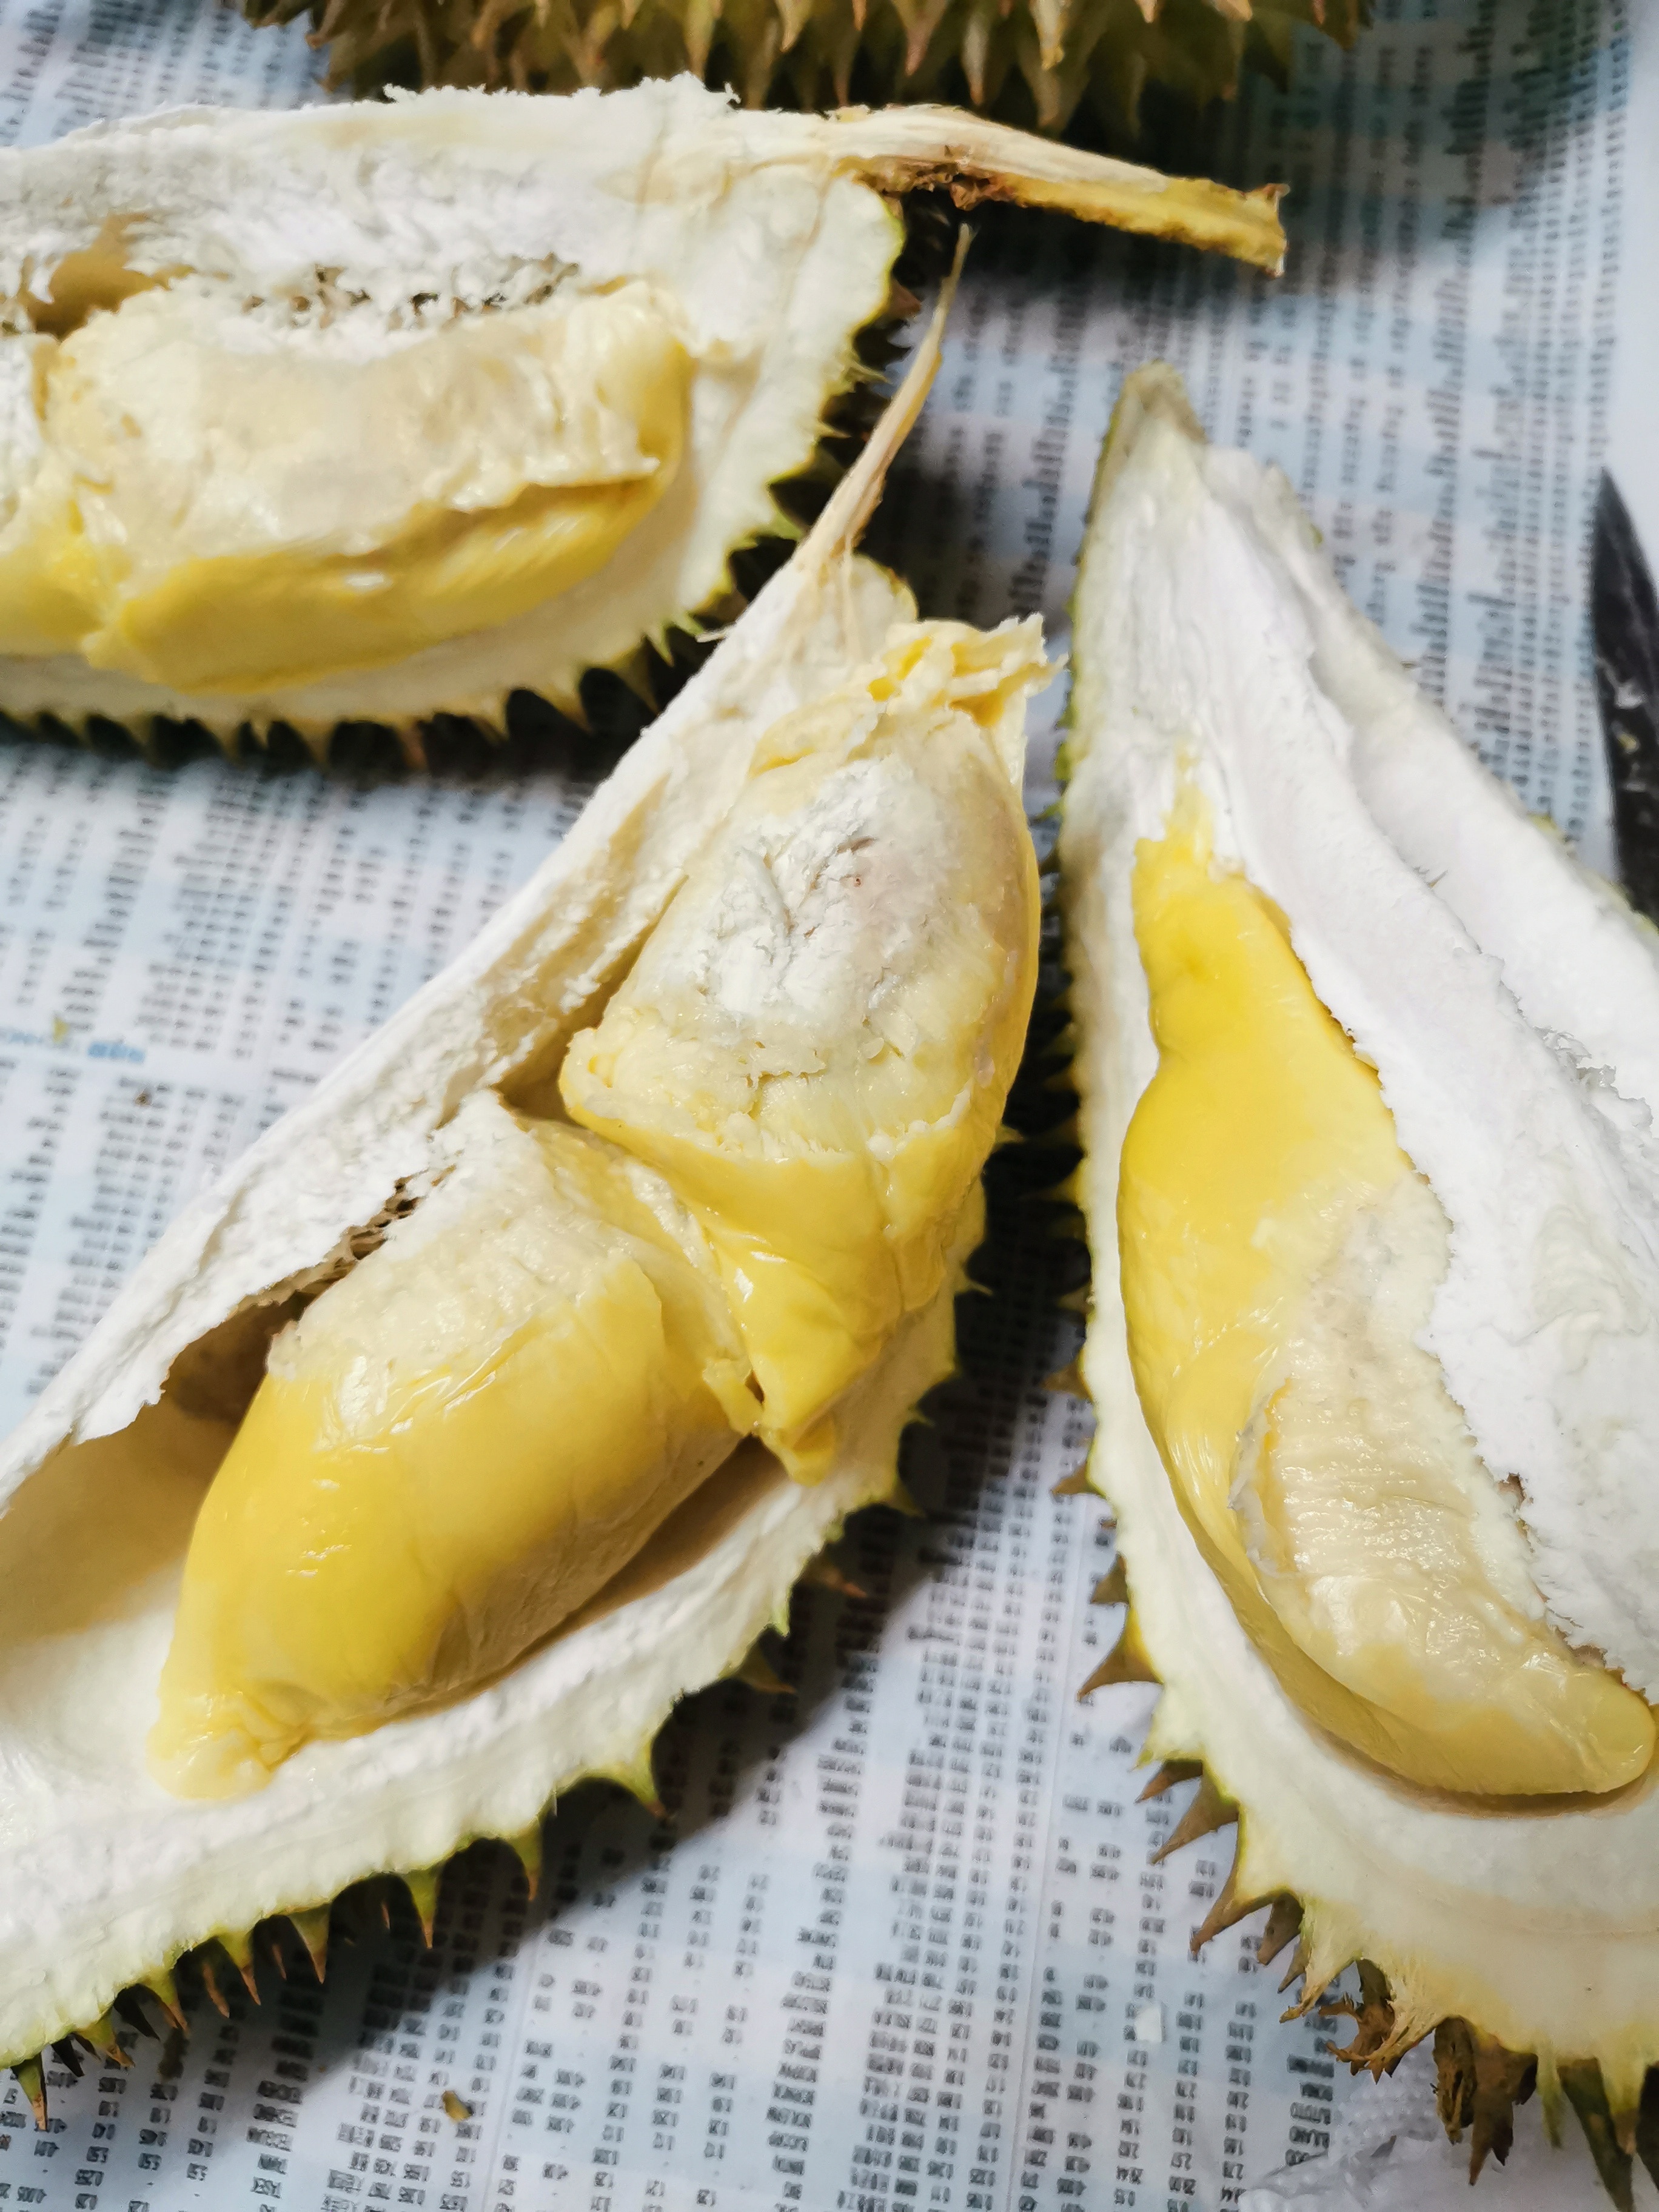 The king of fruits. Durian. The pudding-like flesh is smooth and creamy with sweet and a slight bitter taste. Some may hate it as the smell is overpowering but some find it very addictive.